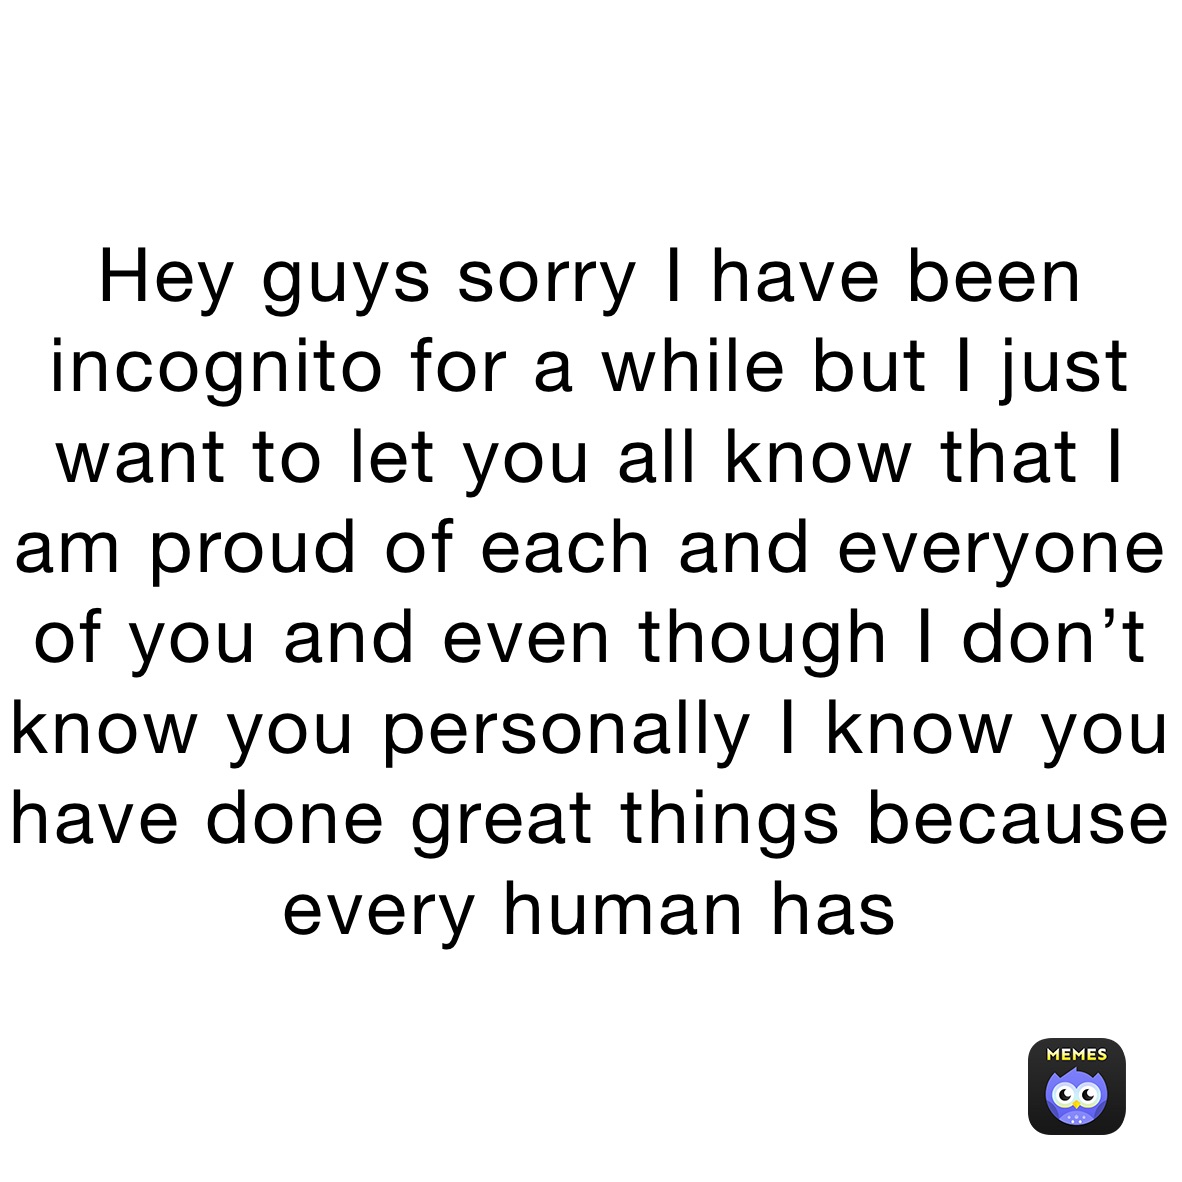 Hey guys sorry I have been incognito for a while but I just want to let you all know that I am proud of each and everyone of you and even though I don’t know you personally I know you have done great things because every human has